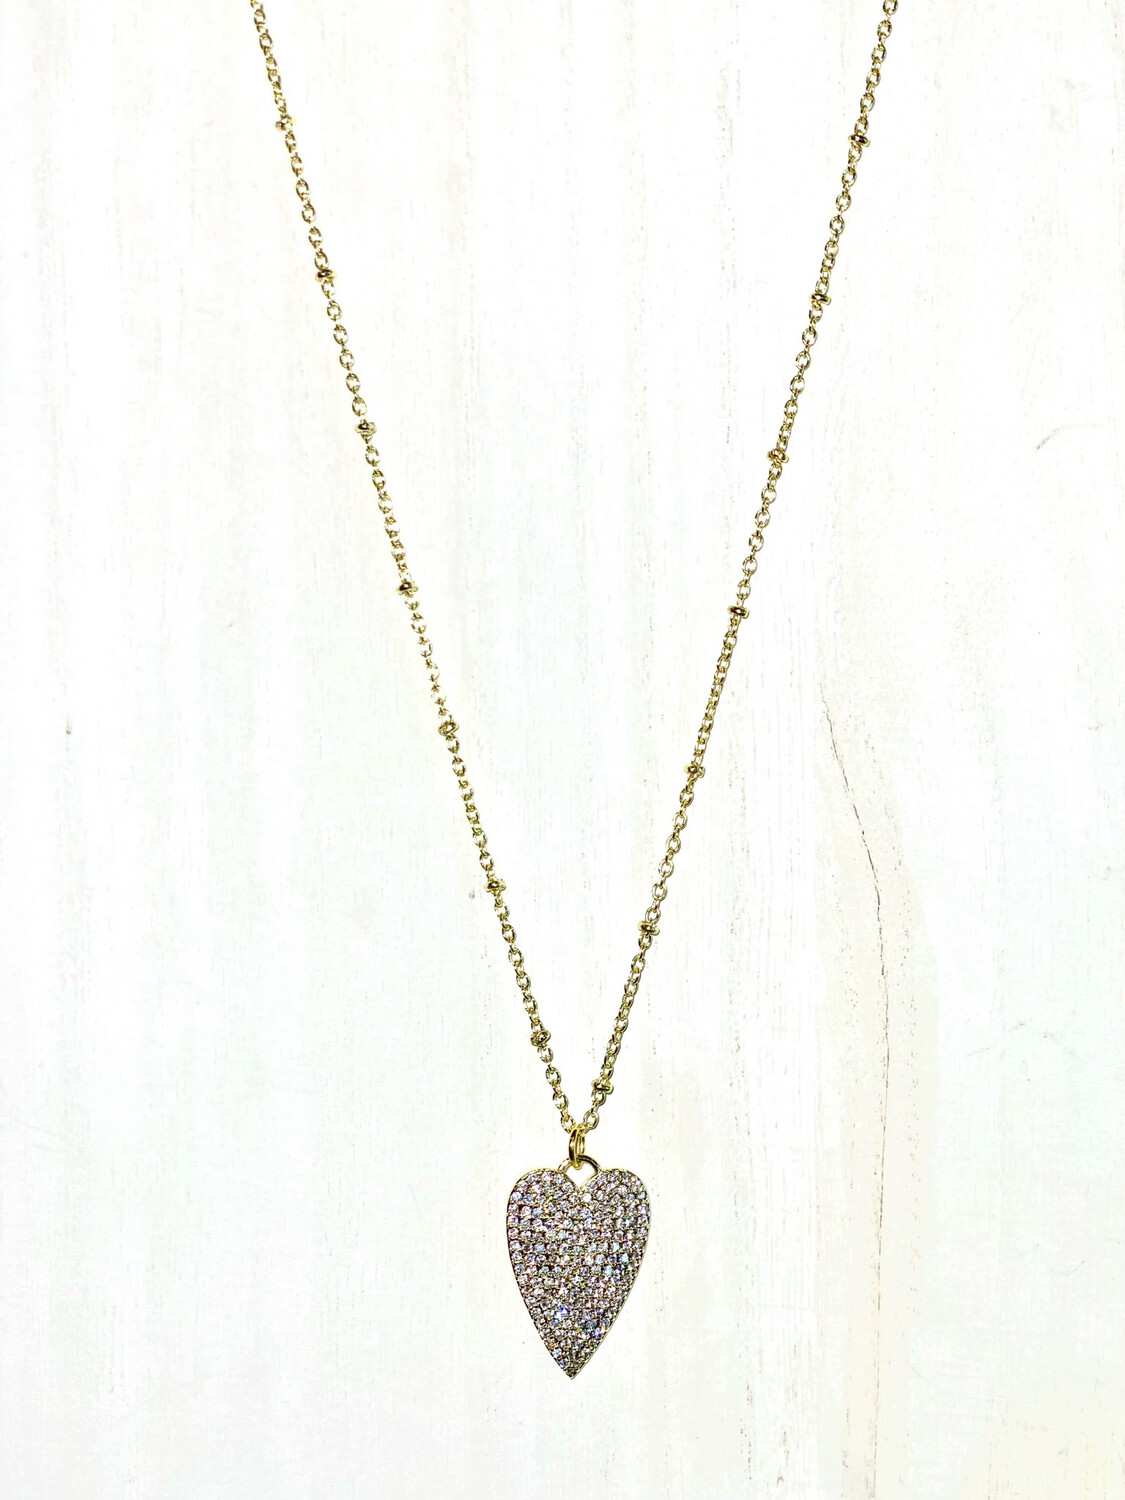 Heart of Gold Necklace - Gold Plated, Handmade